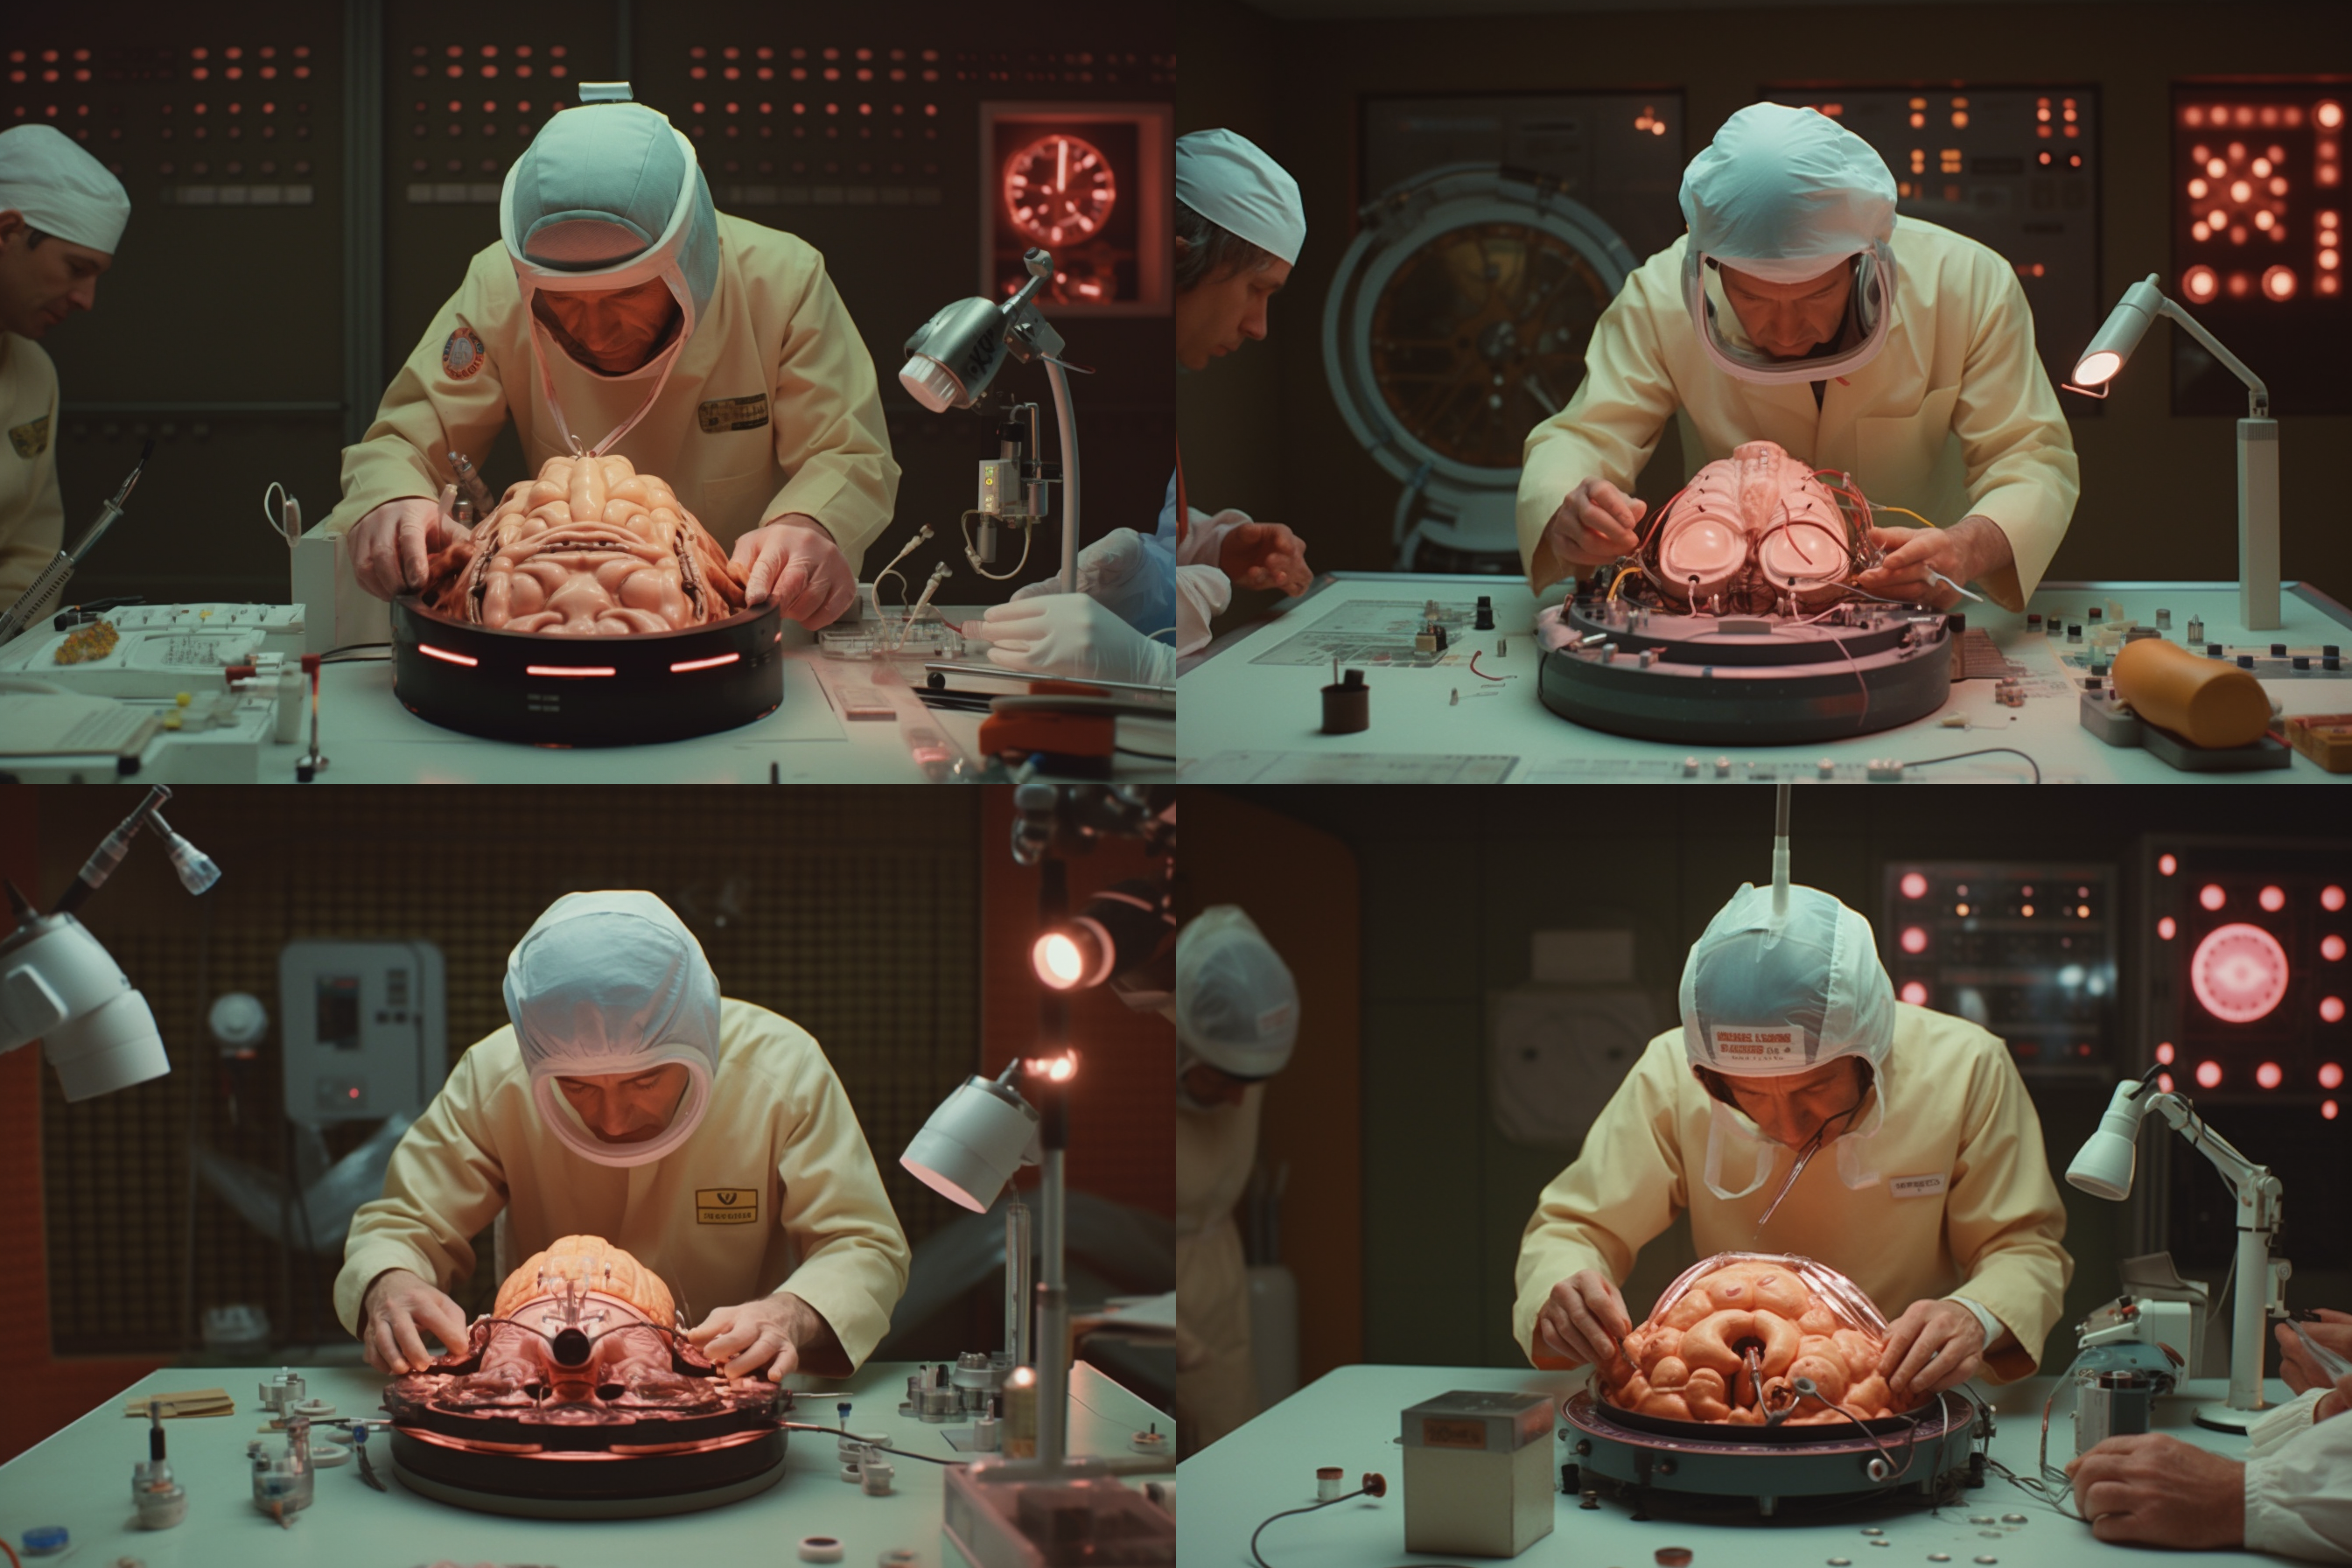 A surgeon operating on a brain.